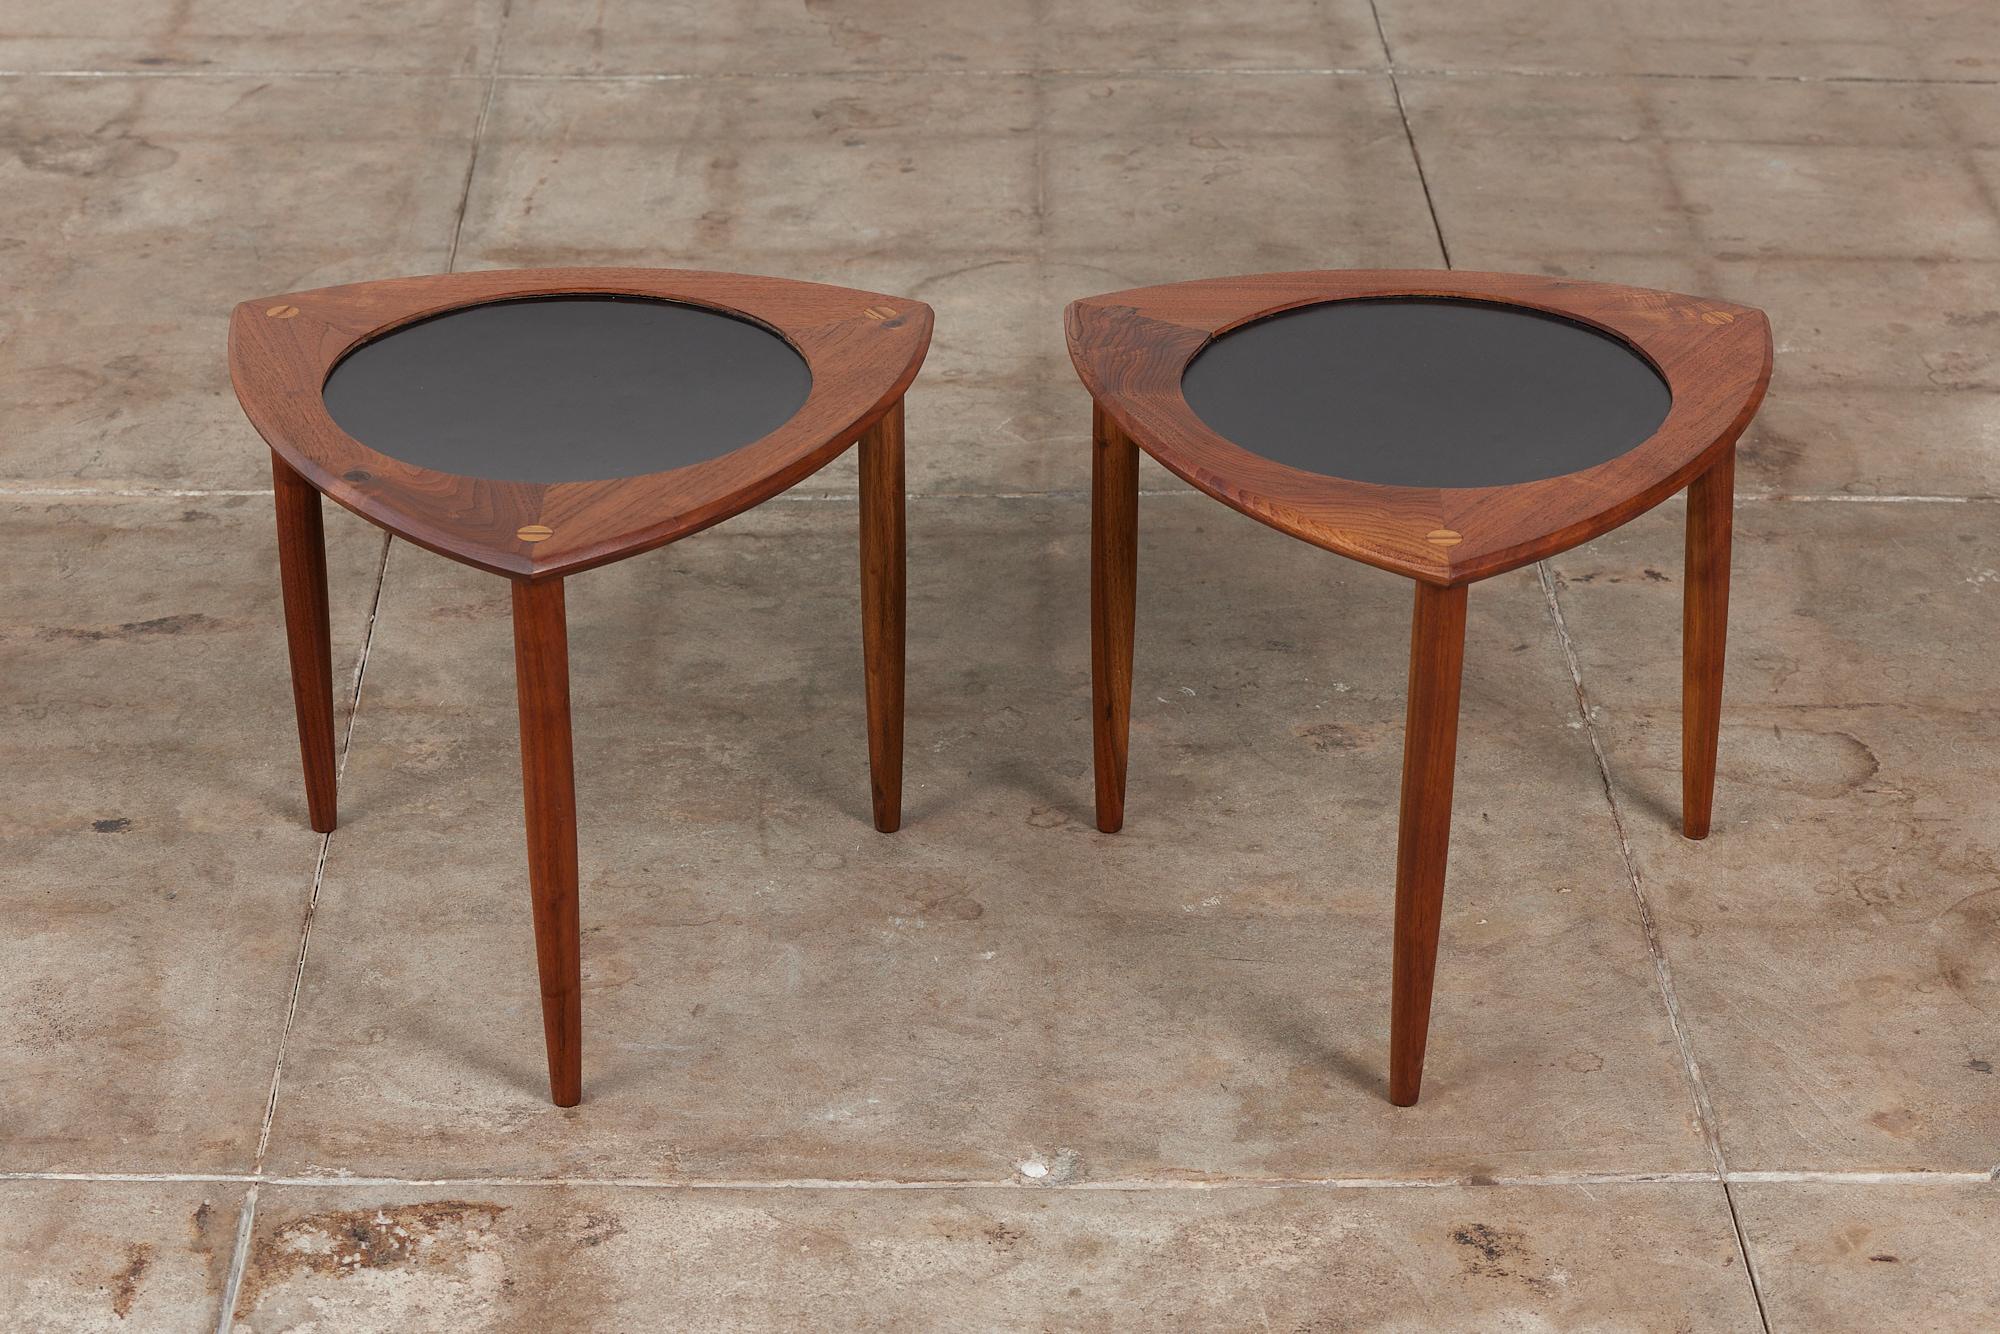 Pair of walnut side tables have a triangular “guitar pick” shape and three tapered dowel legs. The center of each table has a circular black laminate inlay and varying wood gain.

Dimensions
18.75